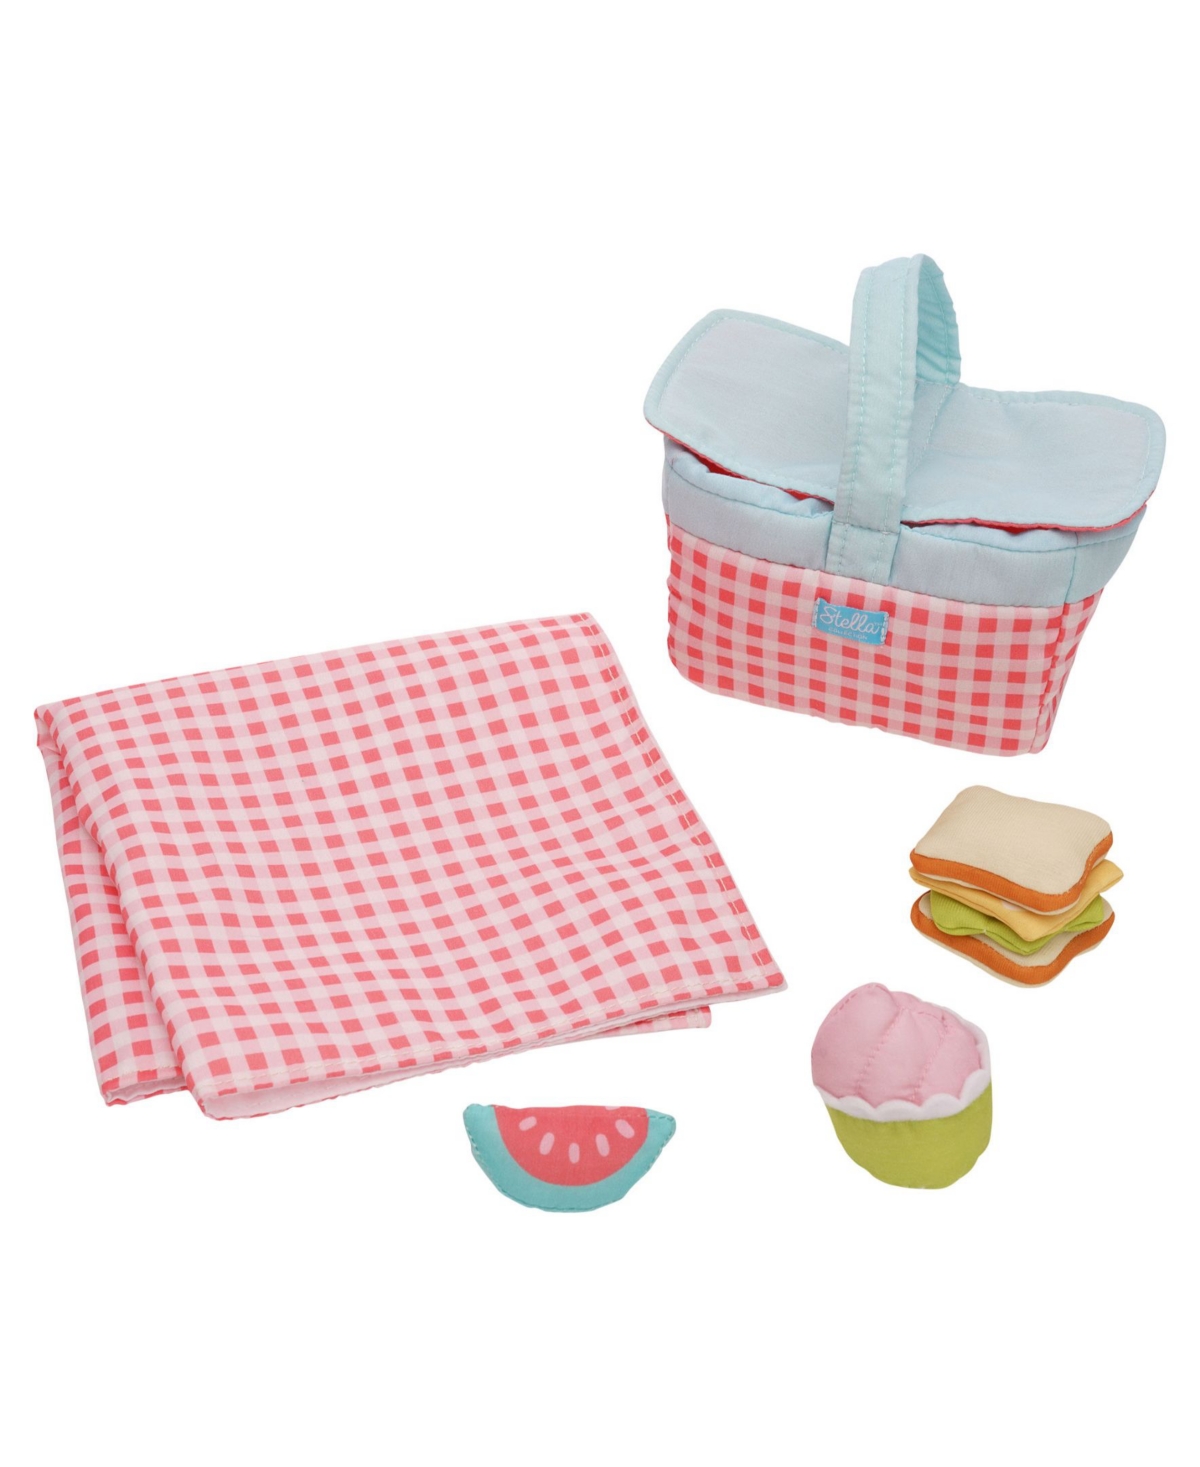 Redbox Manhattan Toy Company Stella Collection Picnic Baby Doll Play Set, 5 Piece In Multi